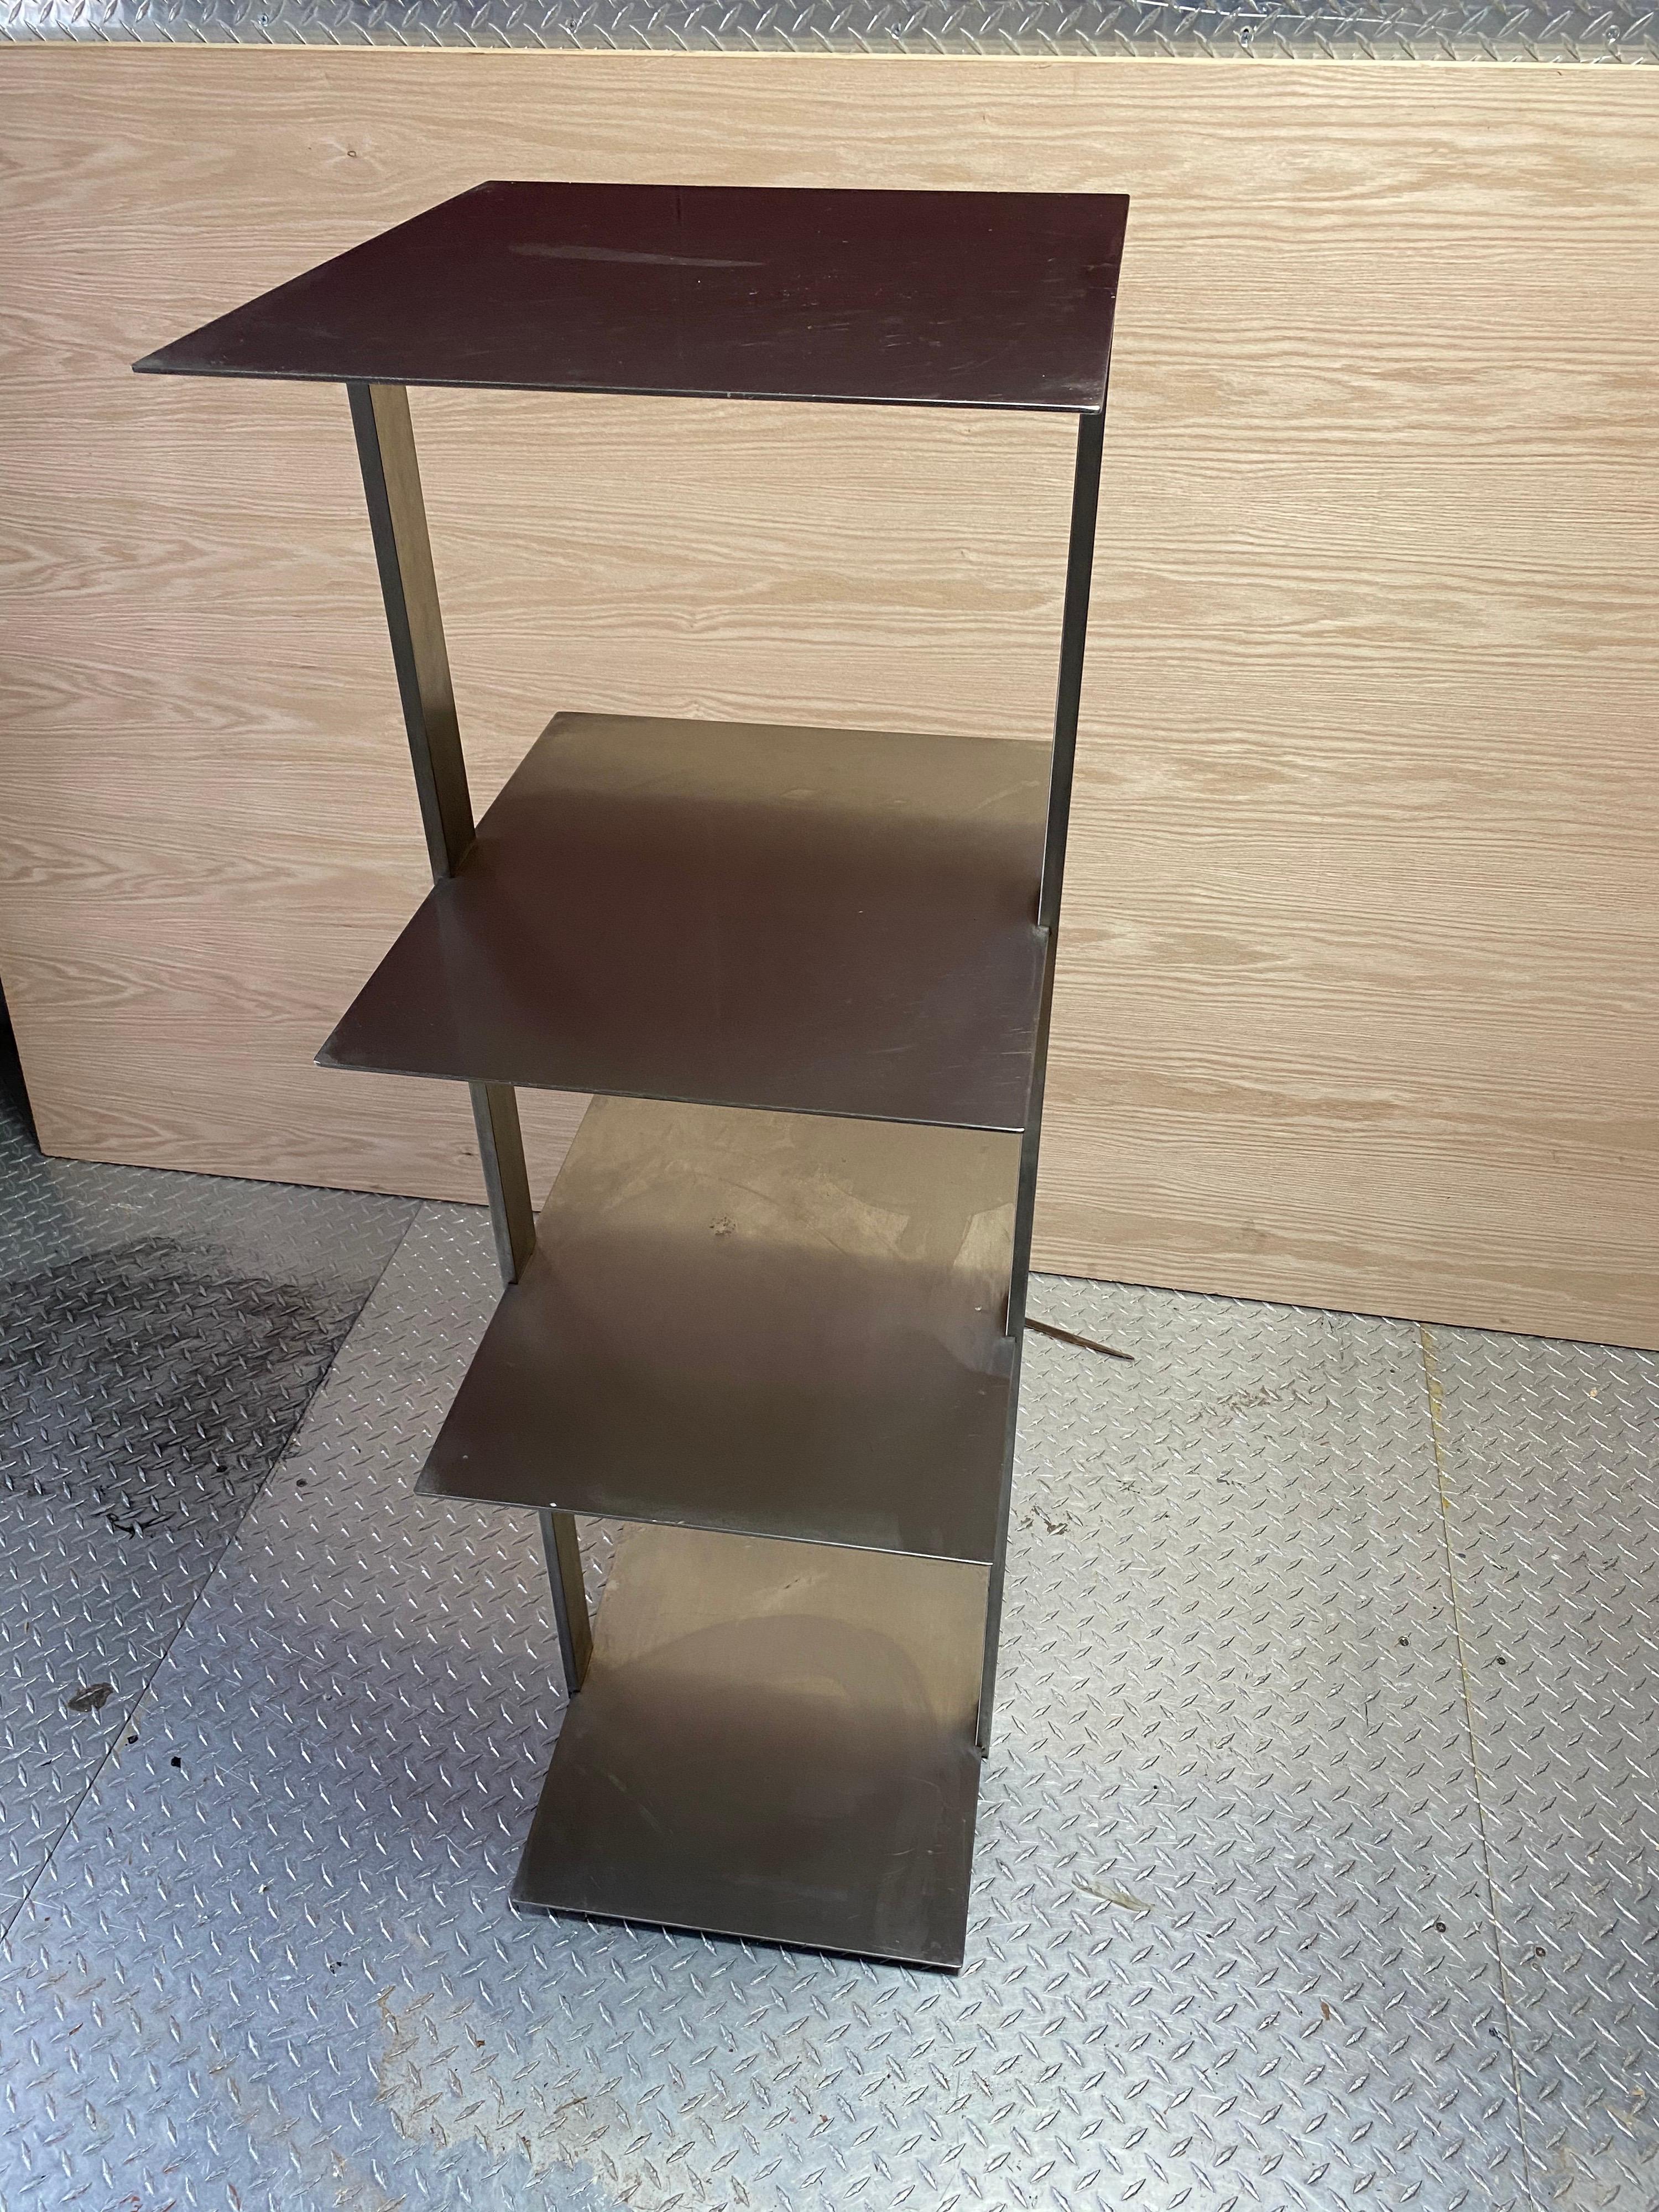 Mid-20th century design Brushed stainless steel and solid 4 shelves. Great lines and solid construction. Measures: height between shelves 13.75